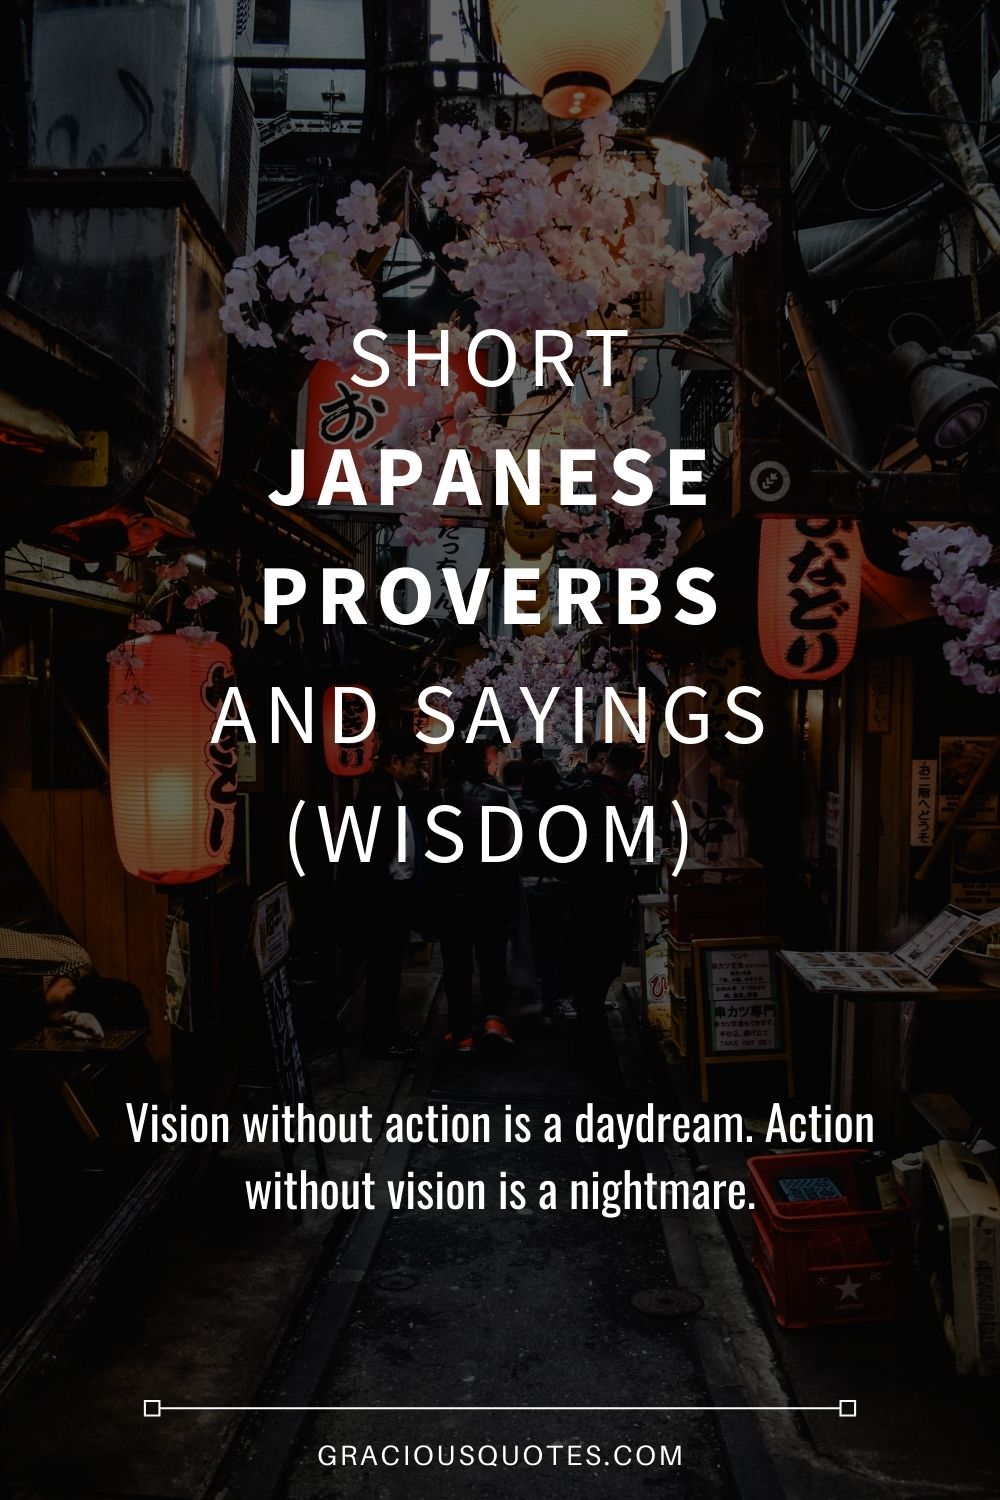 Short Japanese Proverbs and Sayings (WISDOM) - Gracious Quotes